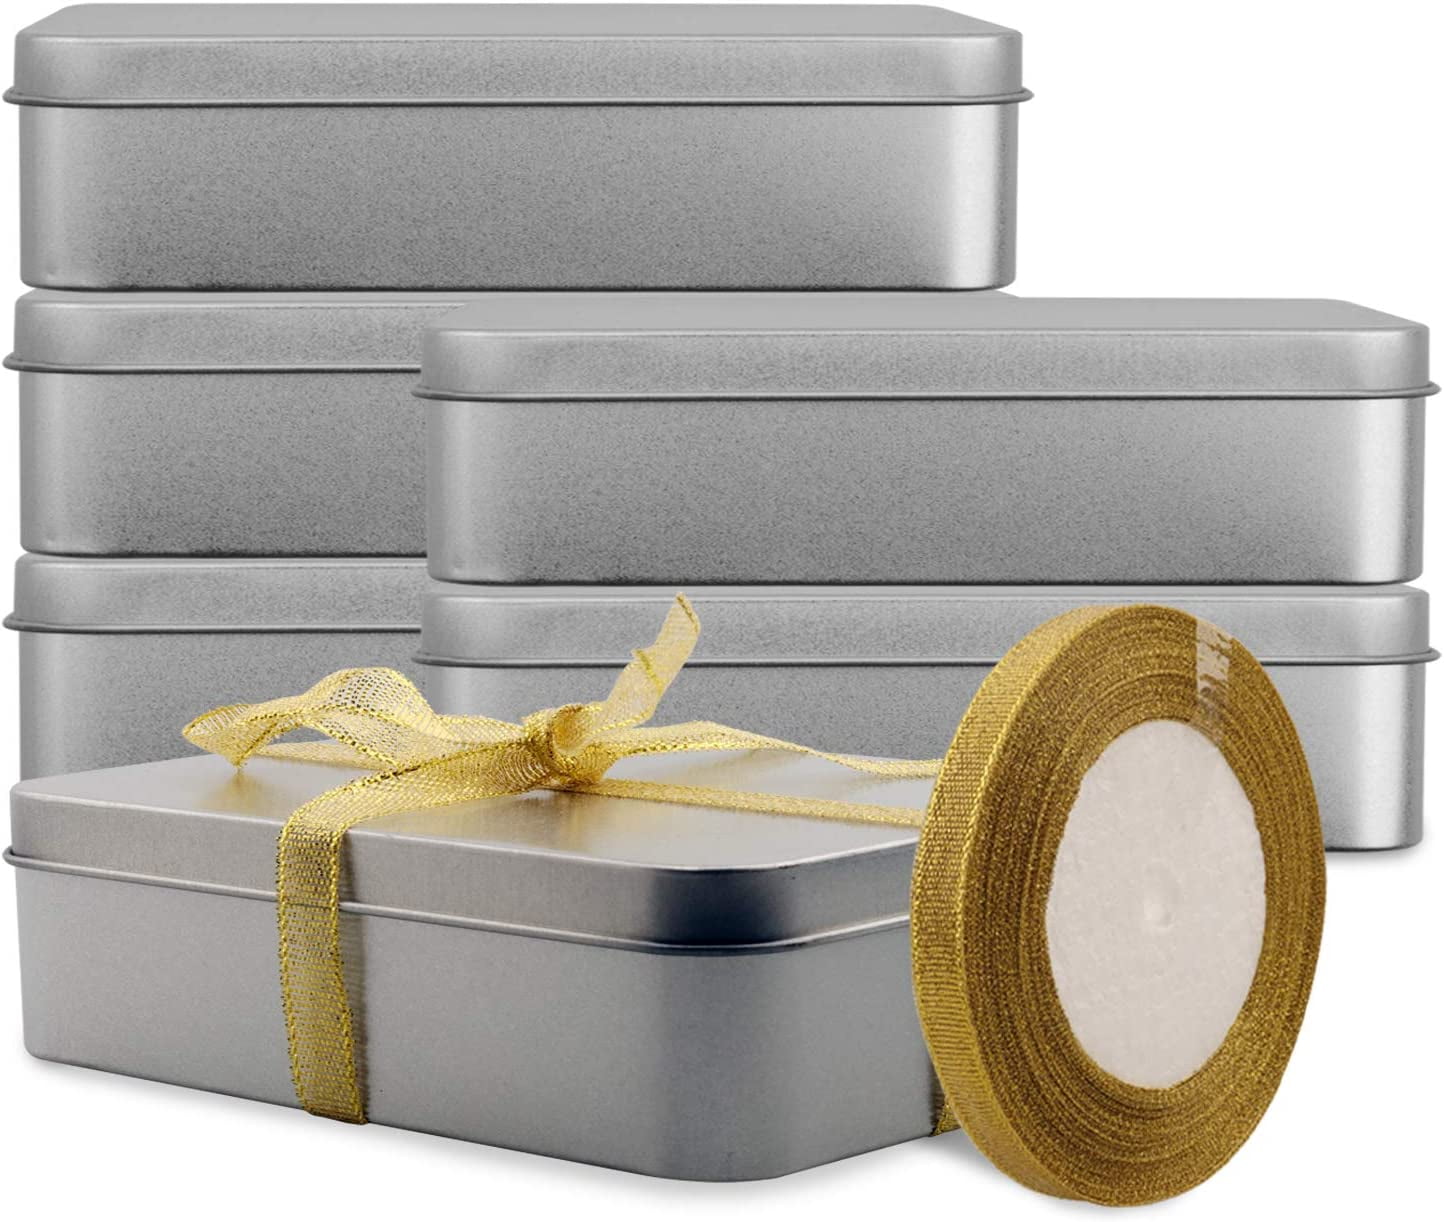 Empty Metal Tins Box with Lid.6 Pack Stainless steel Tins Cans Storage  Container for Treats. Gifts. Candle. Favors and Crafts. Silver (7 x 4.3 x  1.57 Inches) - Walmart.com